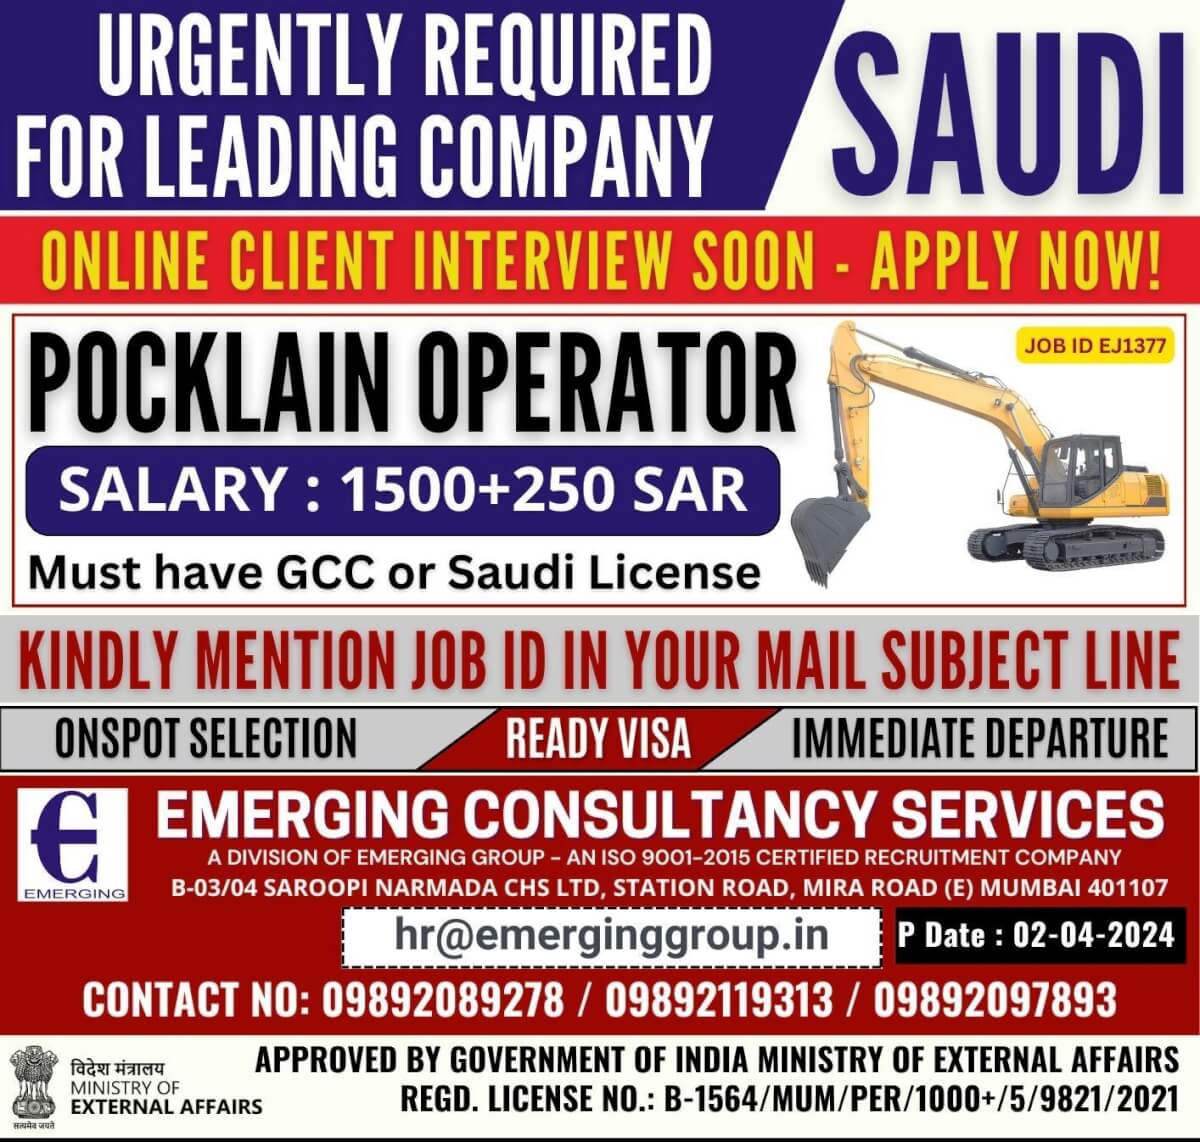 URGENTLY REQUIRED FOR LEADING COMPANY  IN SAUDI ARABIA -